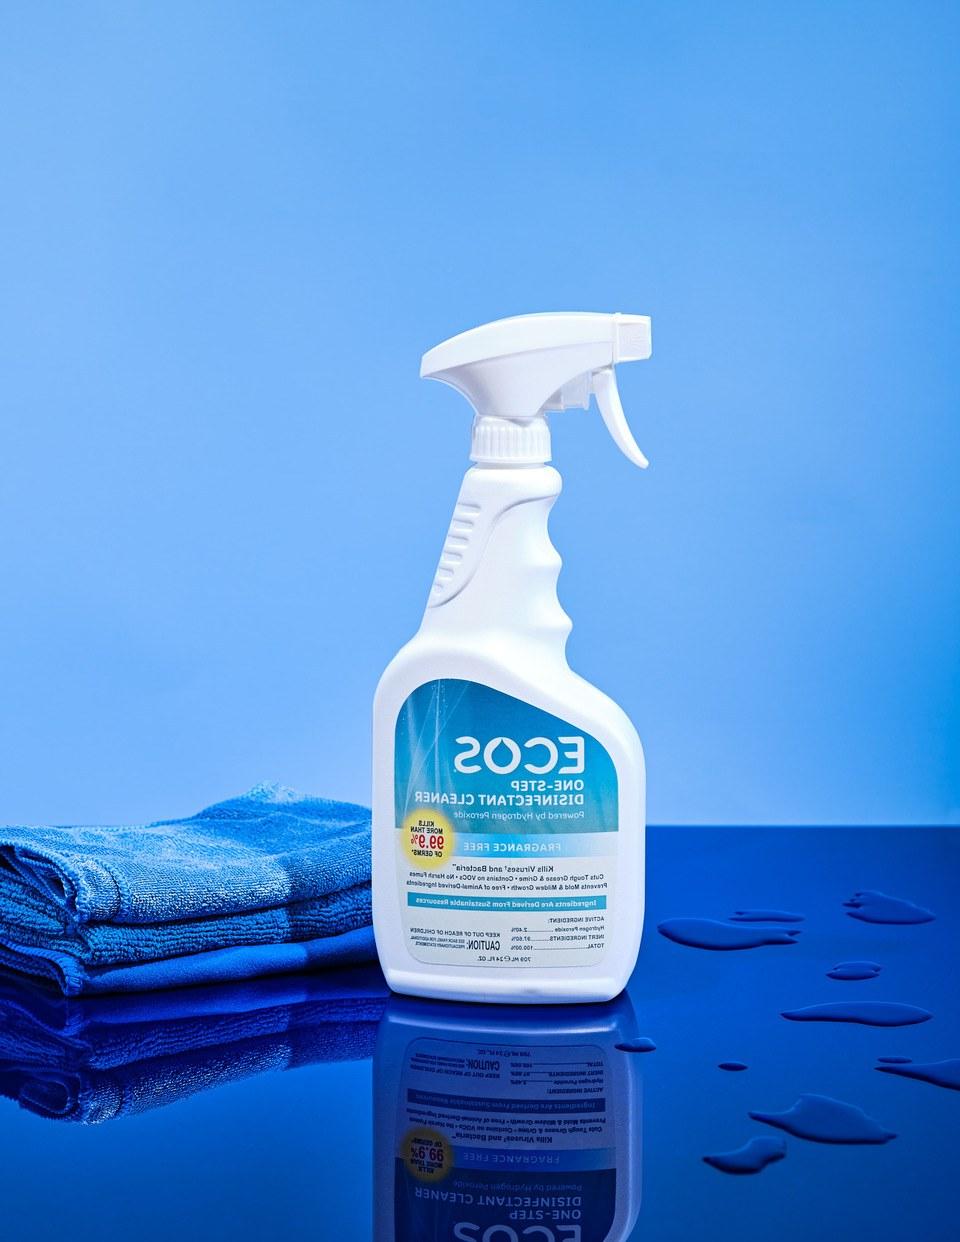 Fragrance Free Disinfectant Spray Bottle & Cleaning Towel